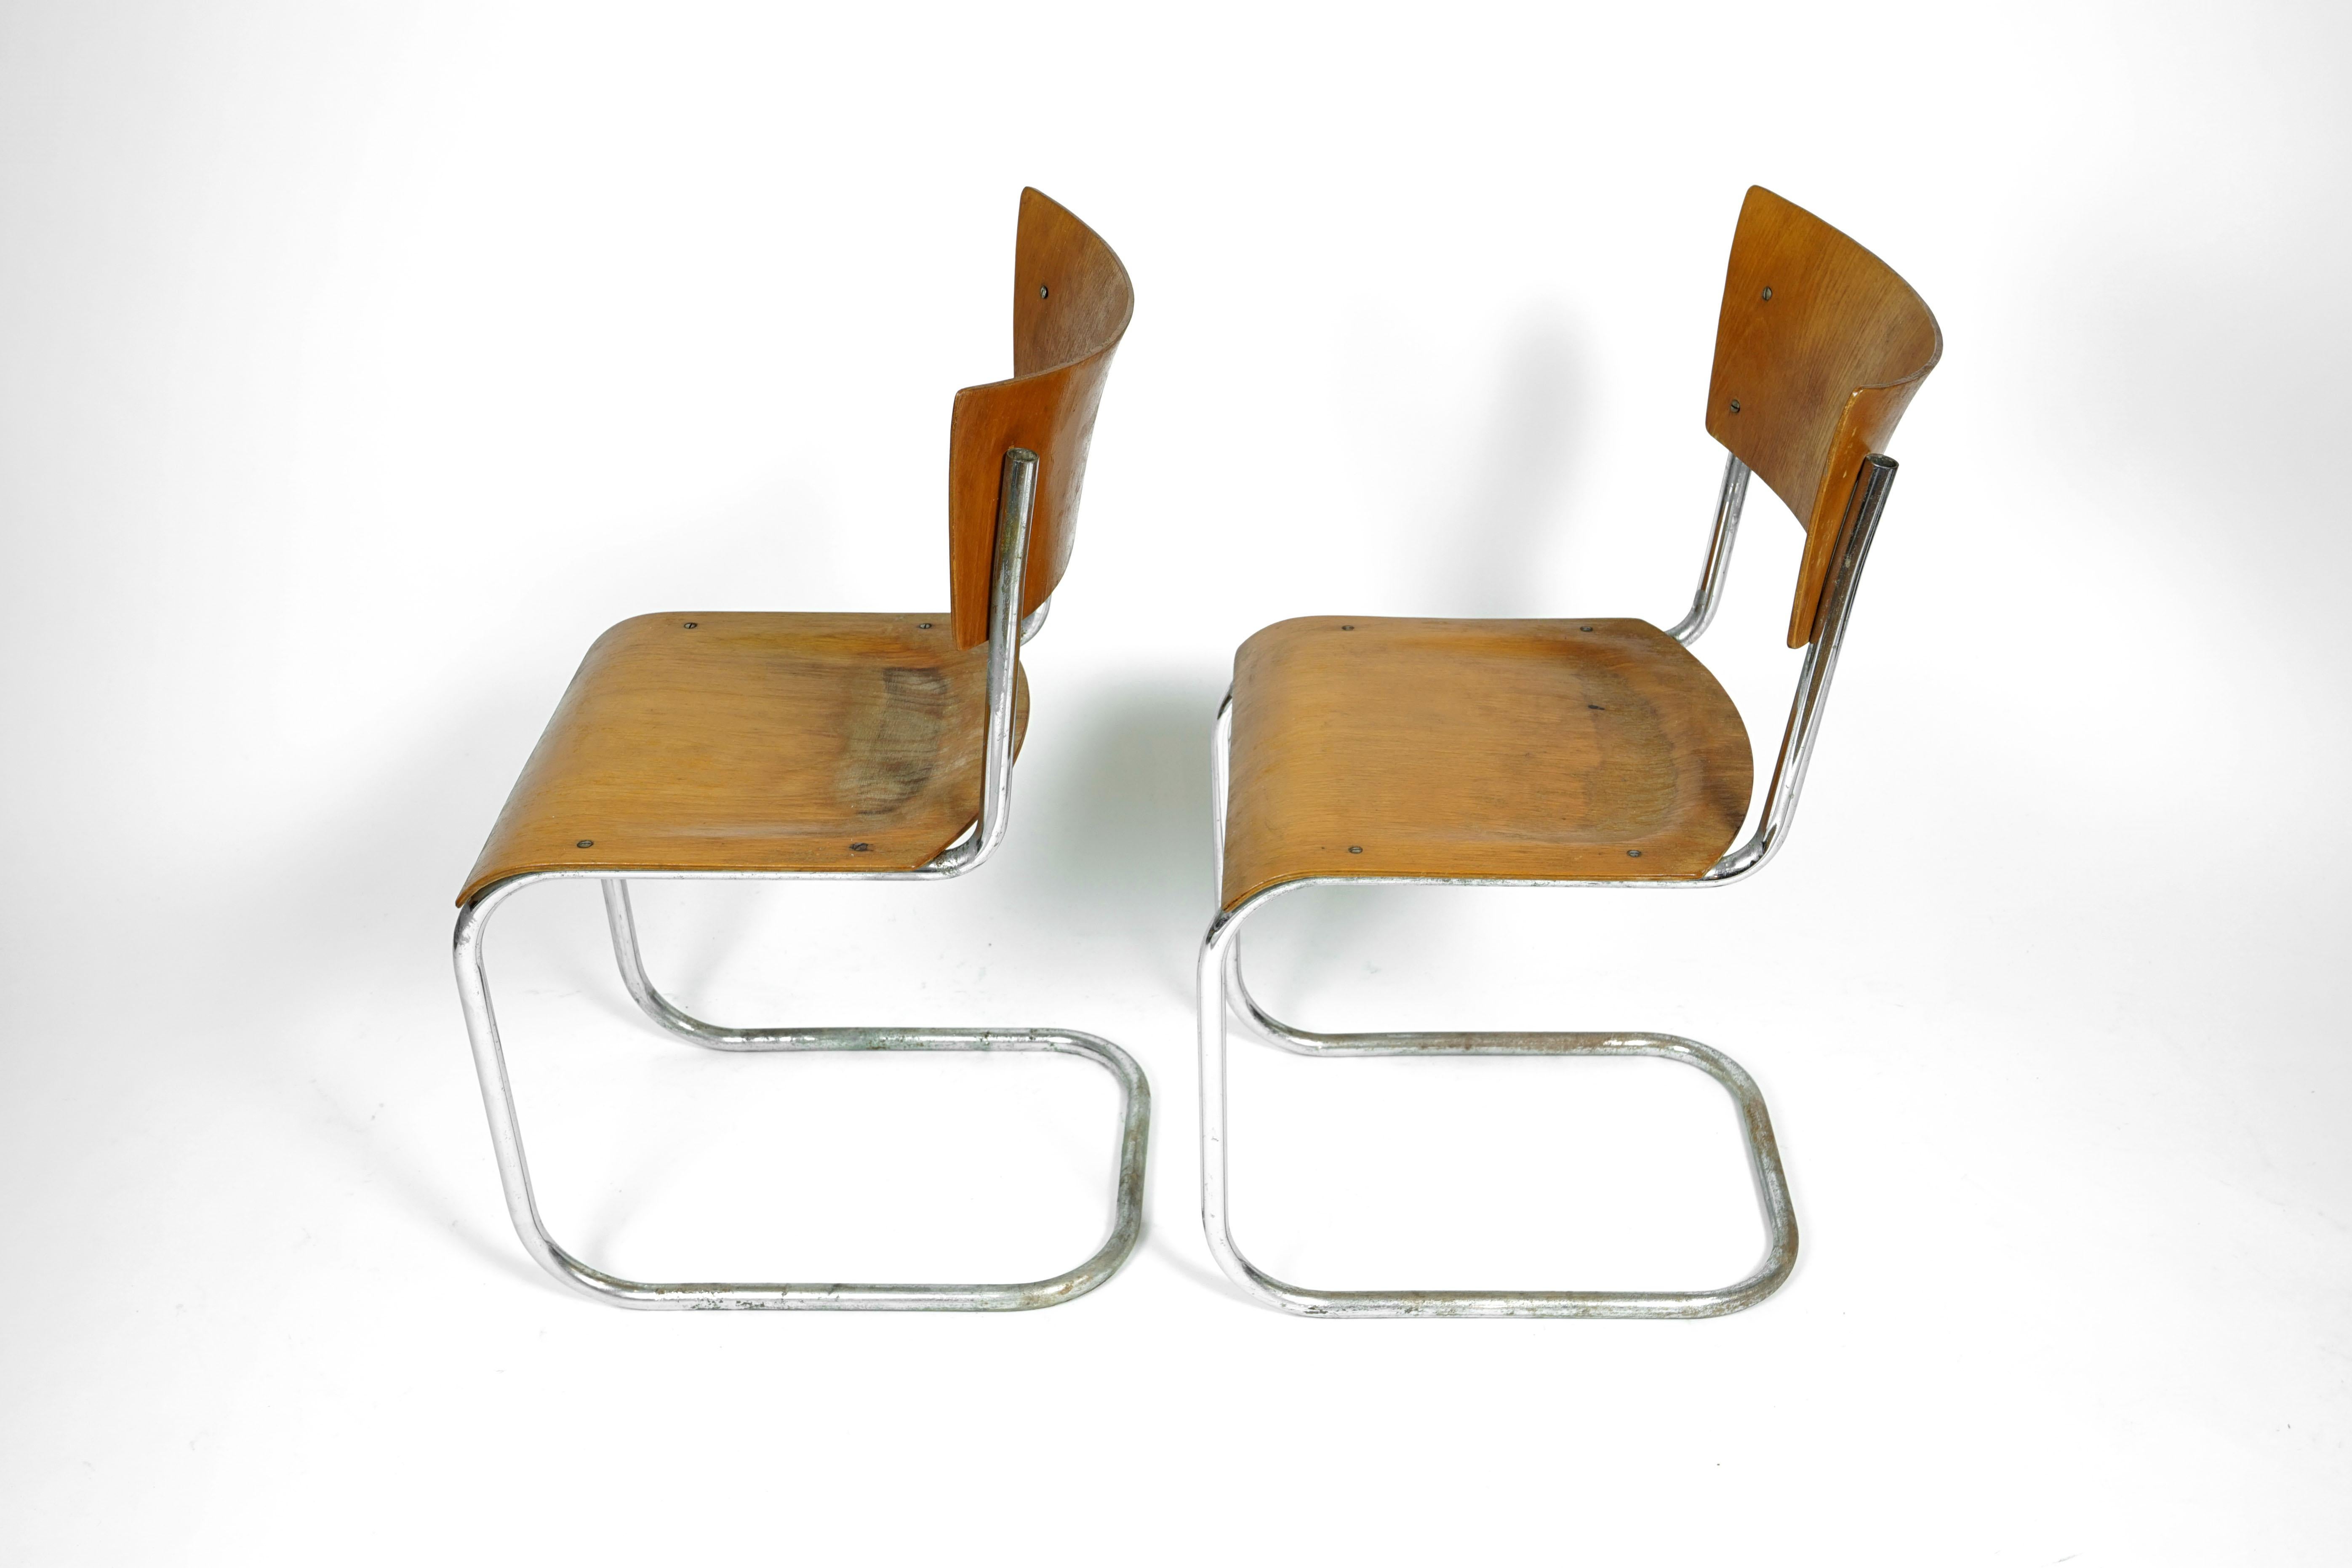 Set of two Bauhaus Cantilever chairs. Designed in late 1920s by Mart Stam and manufactured by Thonet. The chairs are in it's original condition!